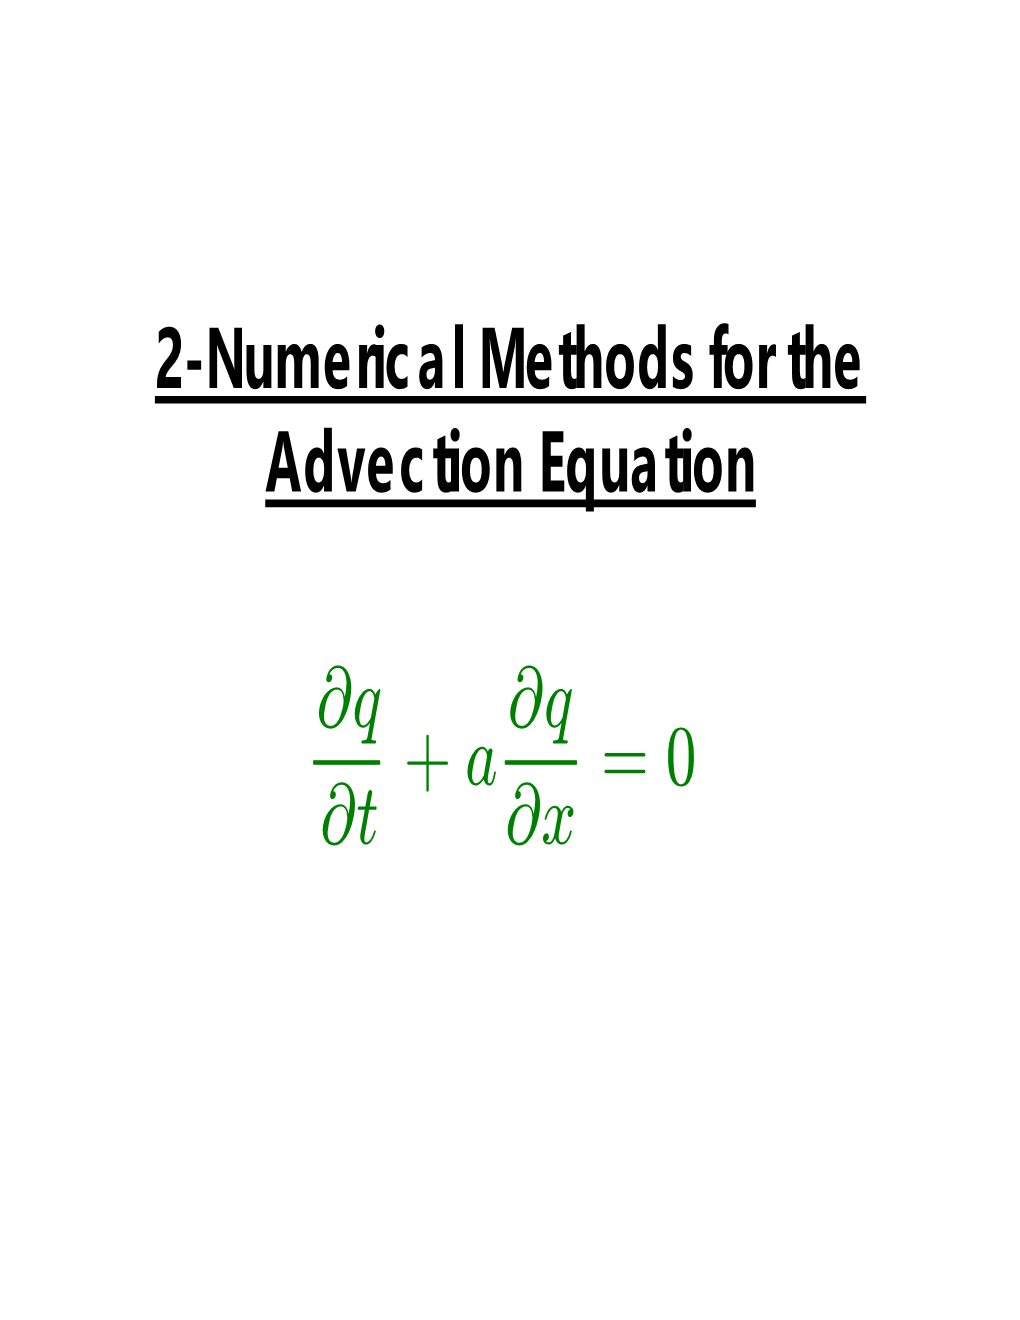 2-Numerical Methods for the Advection Equation